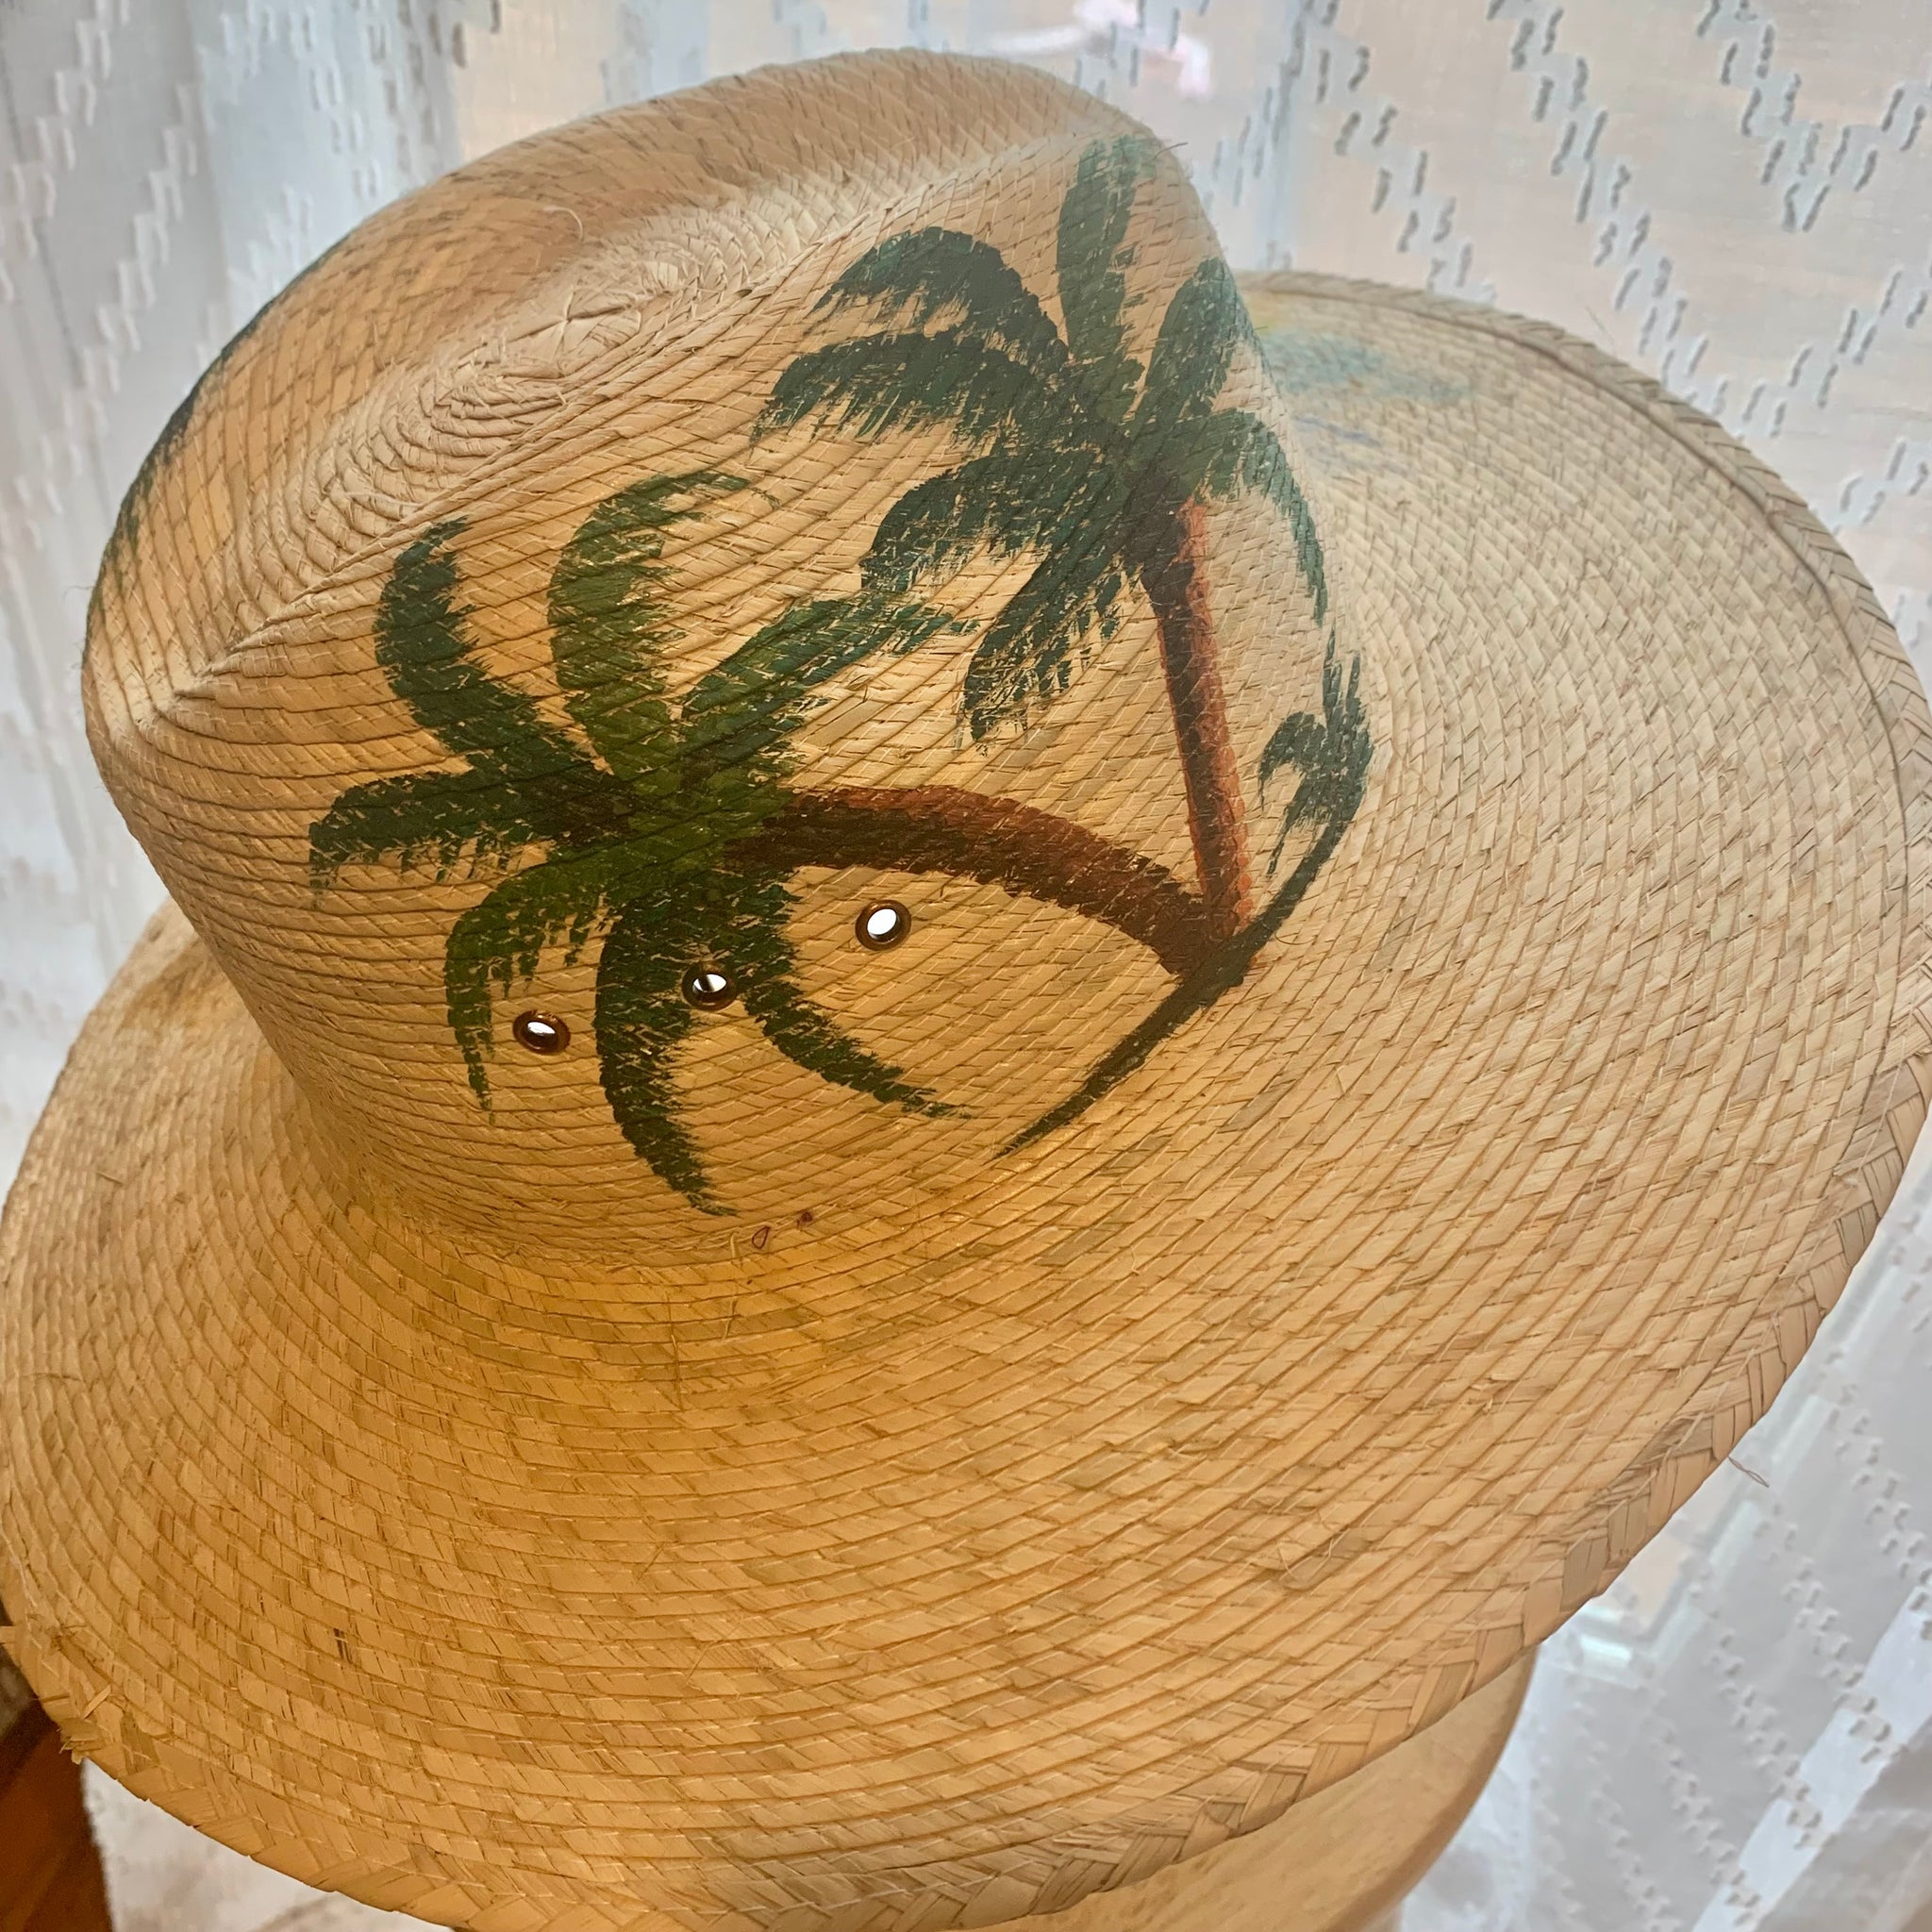 Cuba y puerto rico straw hat â a touch of nellie boutique